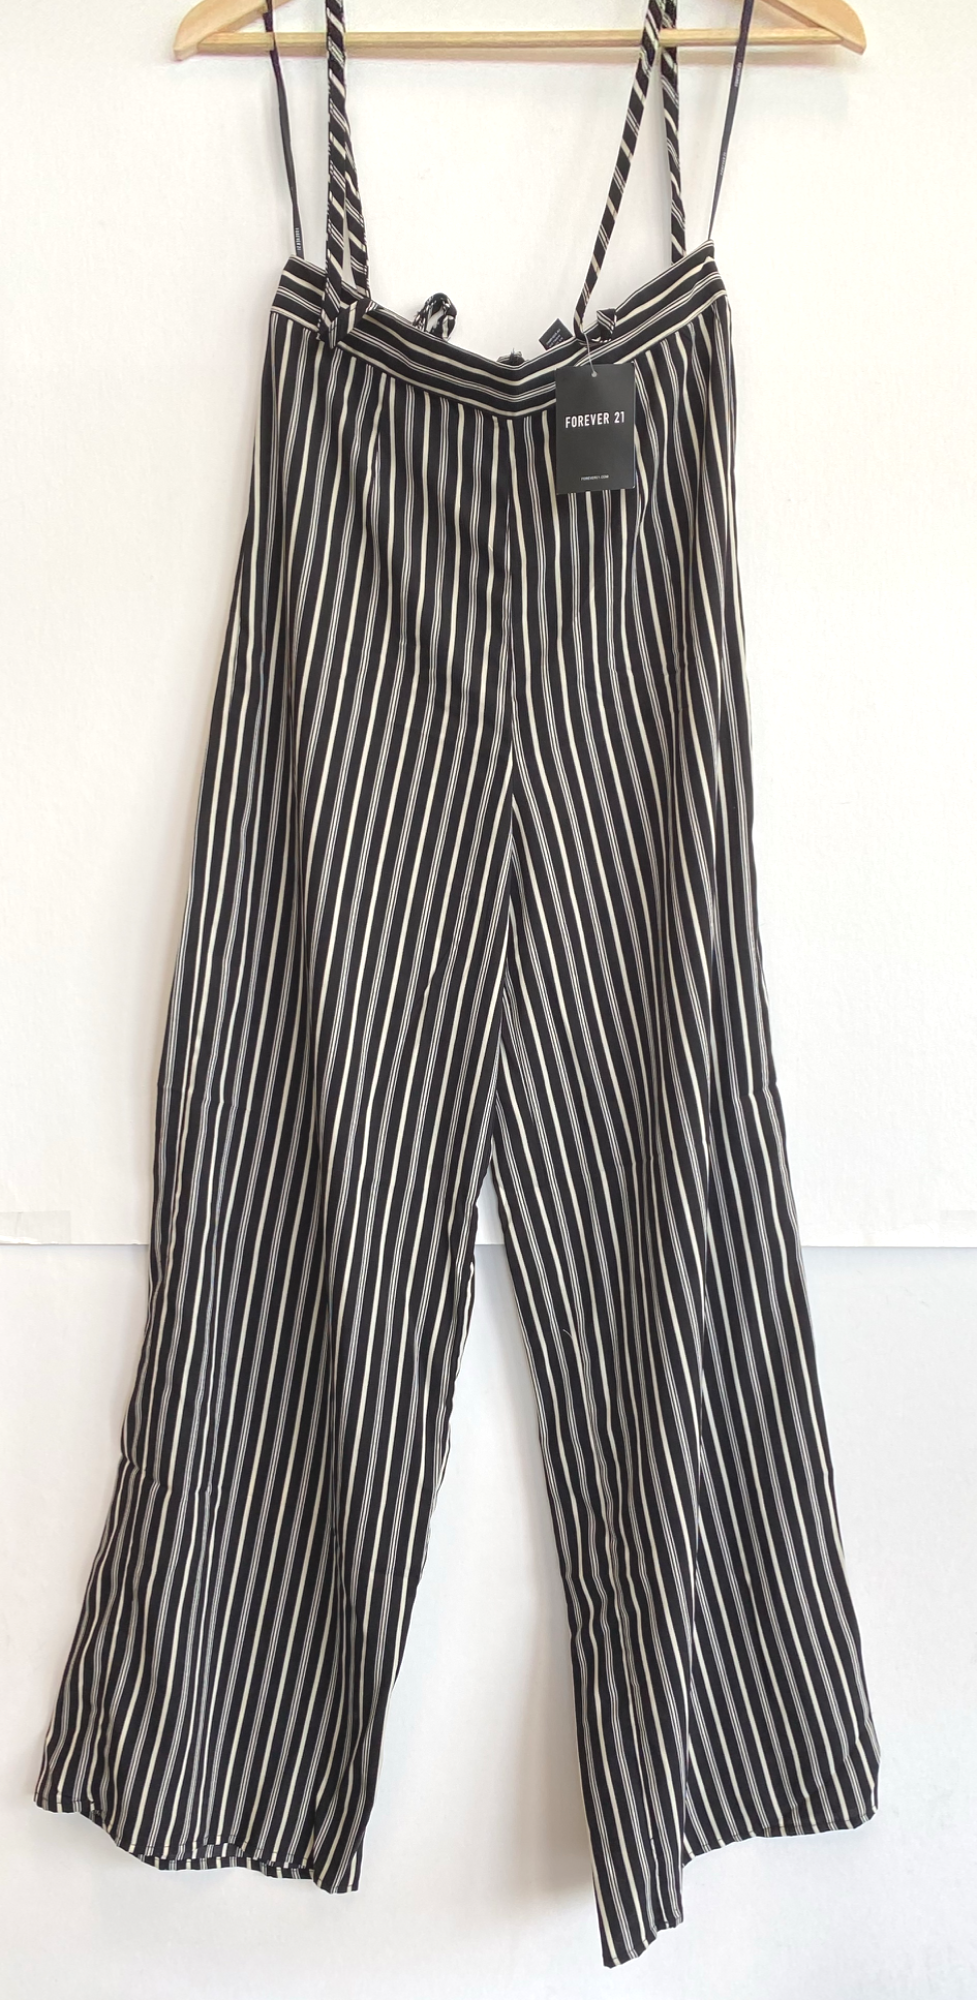 Forever 21 Pants Size Small